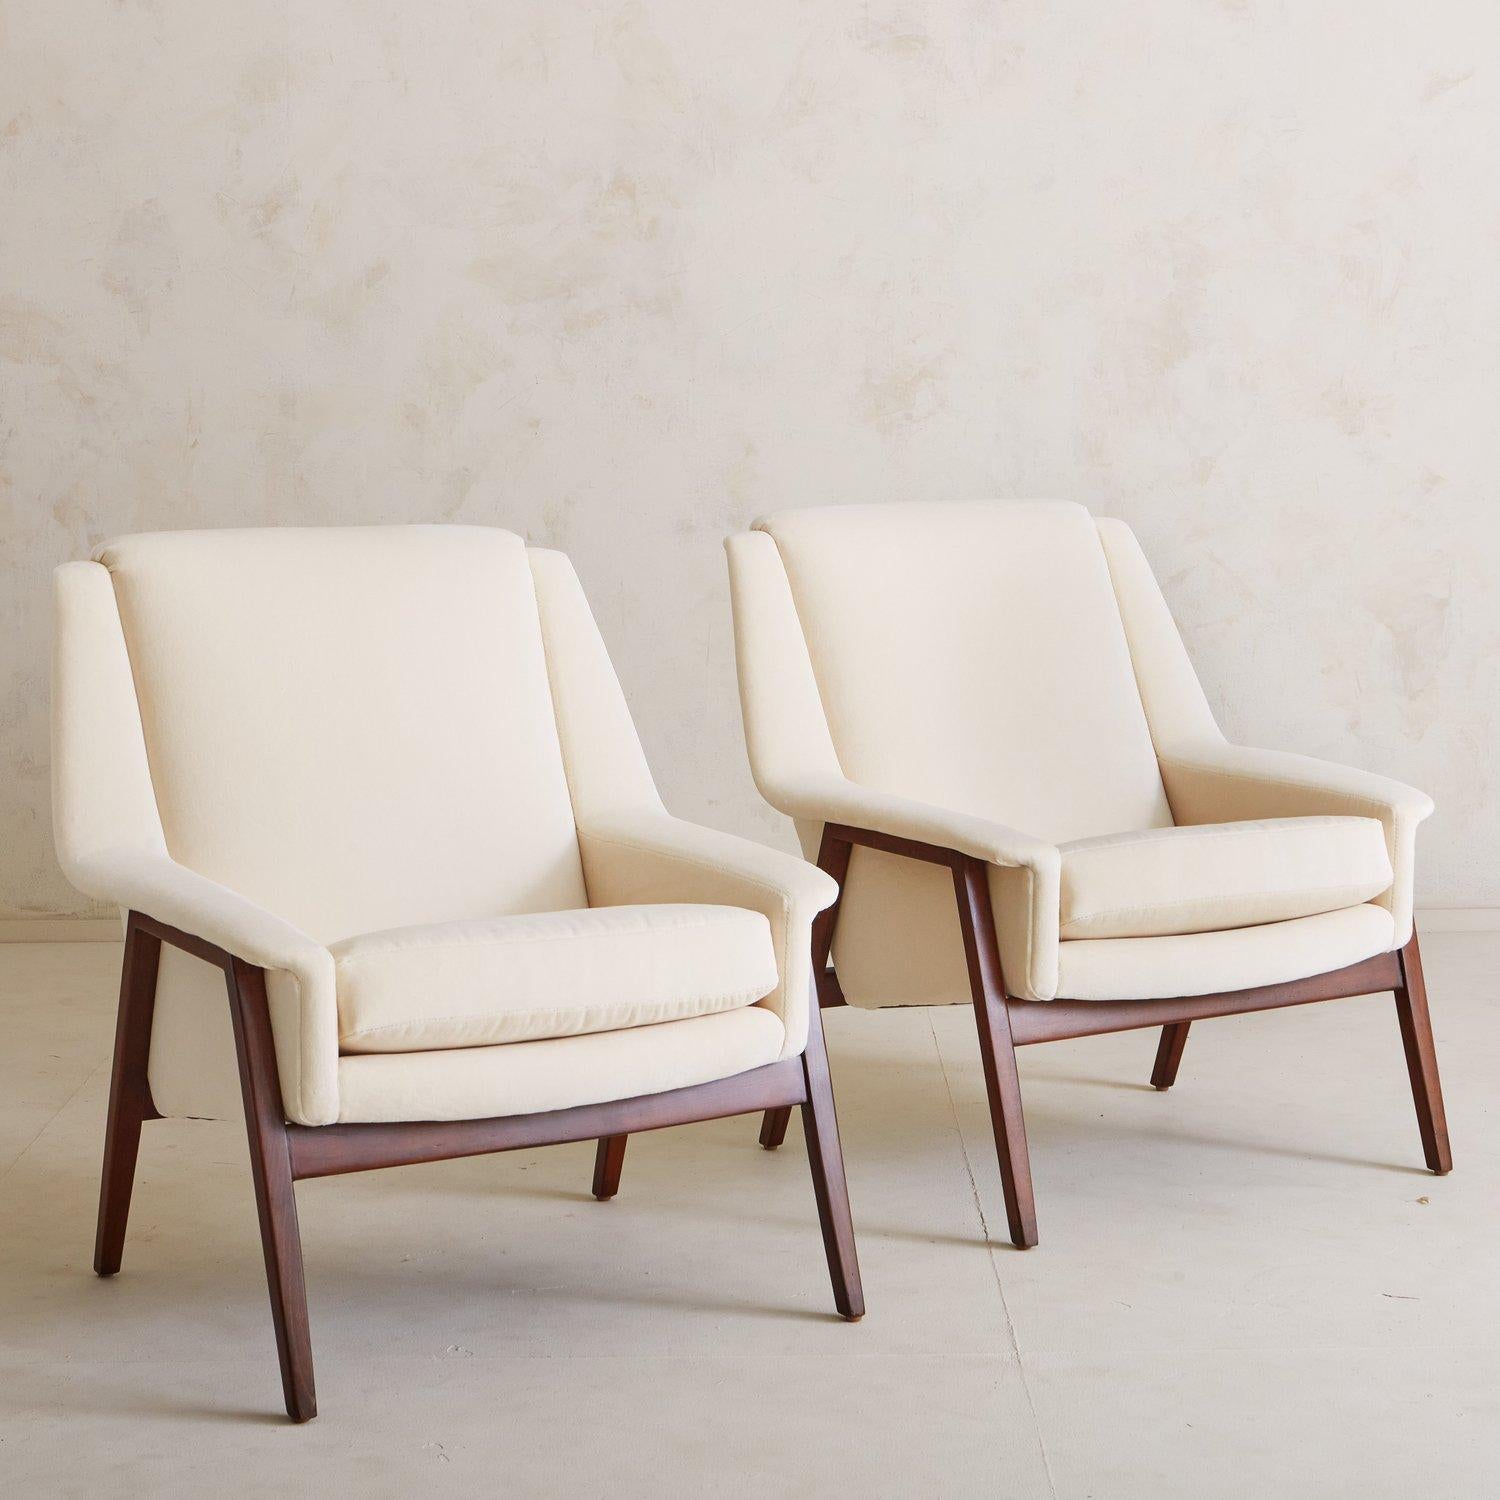 Mid-Century Modern Pair of Maple Lounge Chairs in White Cotton Velvet, Italy 1950s